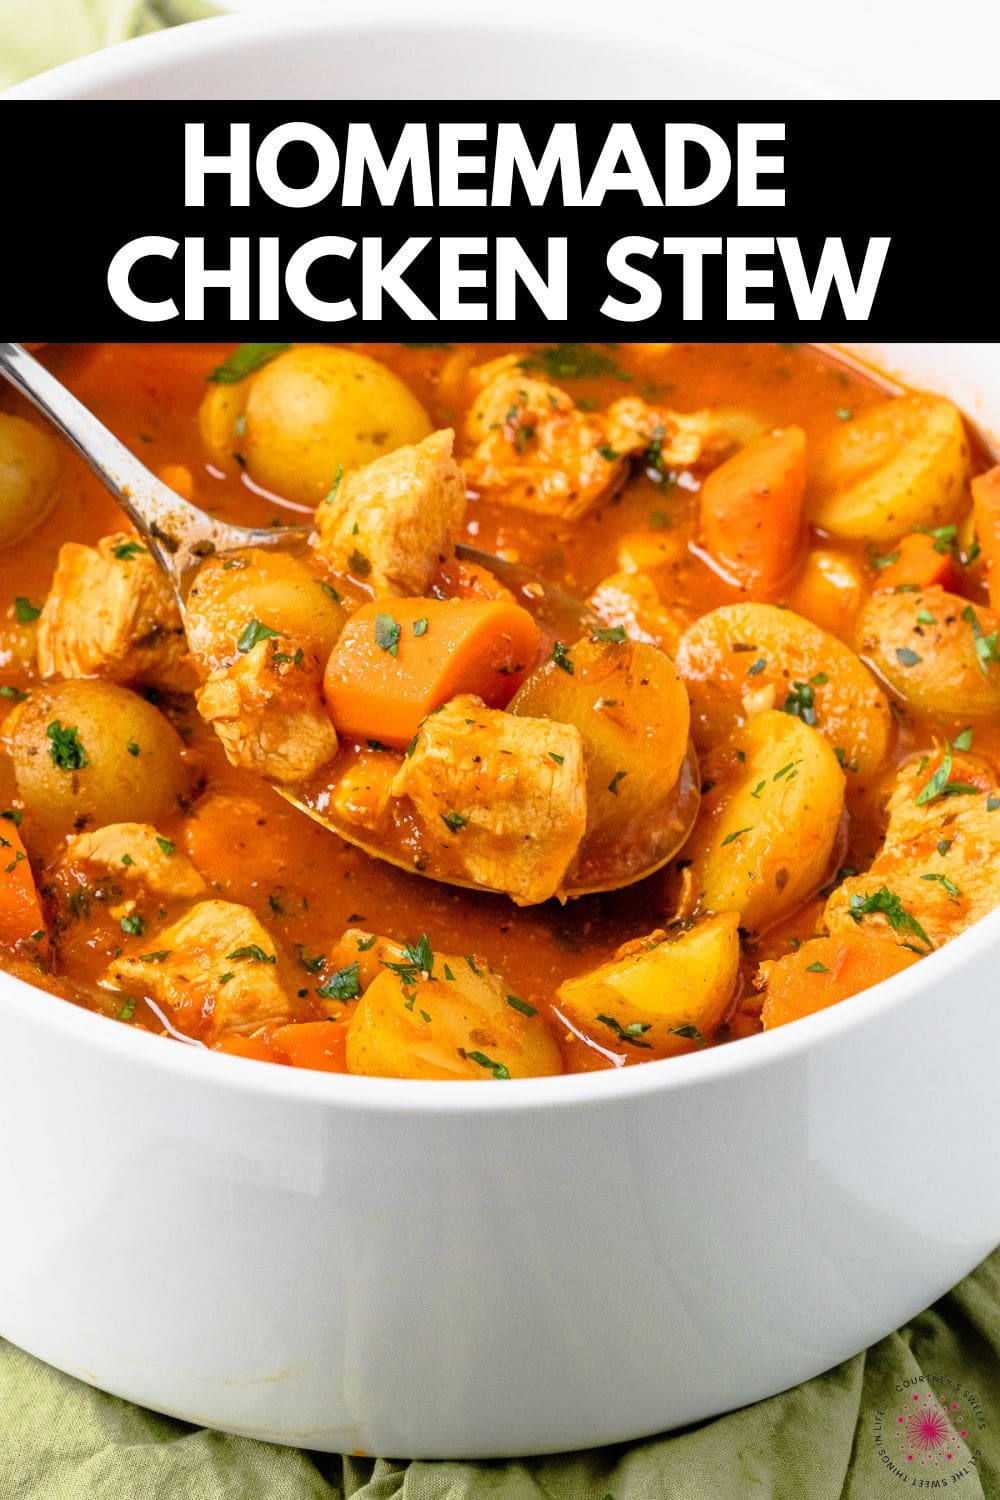 homemade chicken stew with text image.